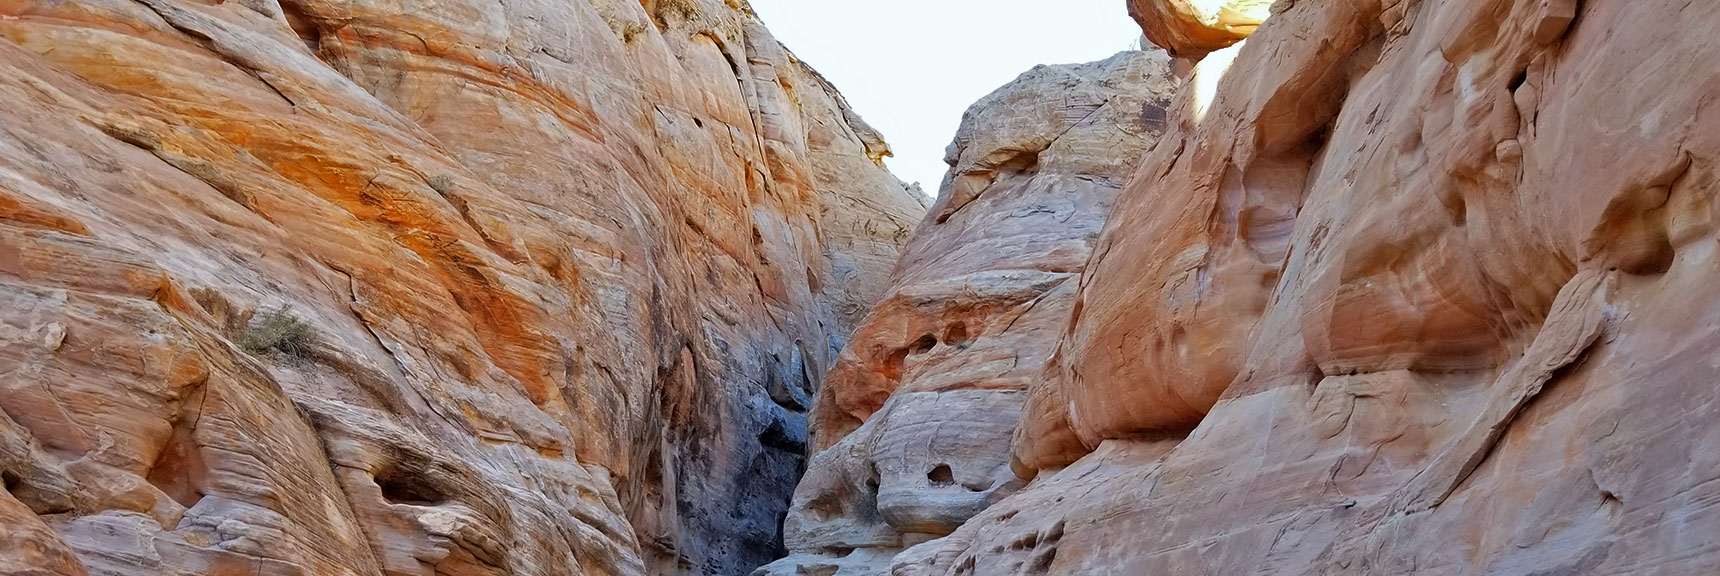 Entering the Slot Canyon on White Domes Loop in Valley of Fire State Park, Nevada